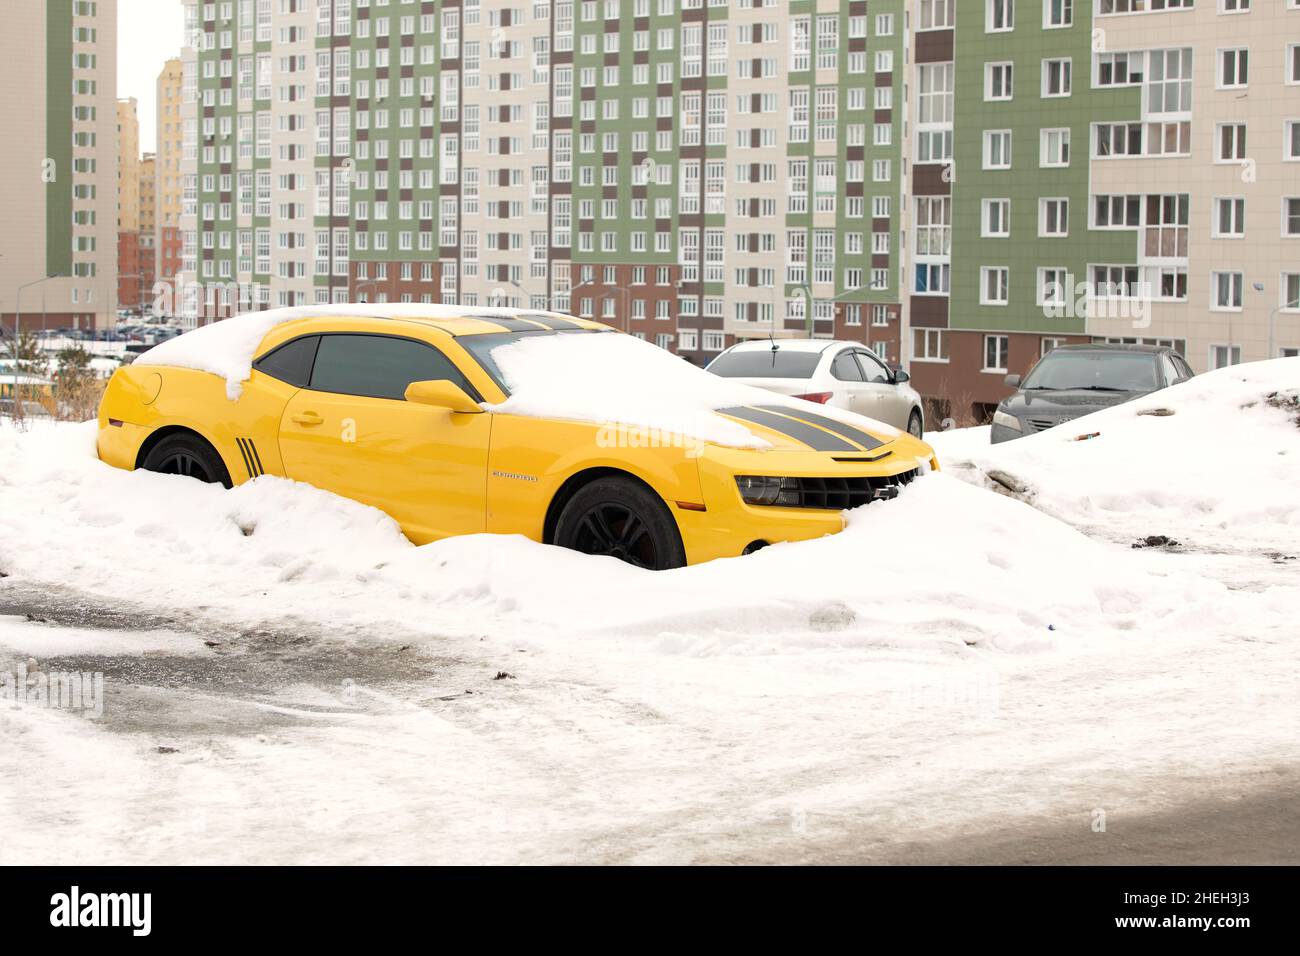 Yellow Chevrolet Camaro with black stripes standing at car parking in winter. Omsk, Russia, 29.02.2020 Stock Photo